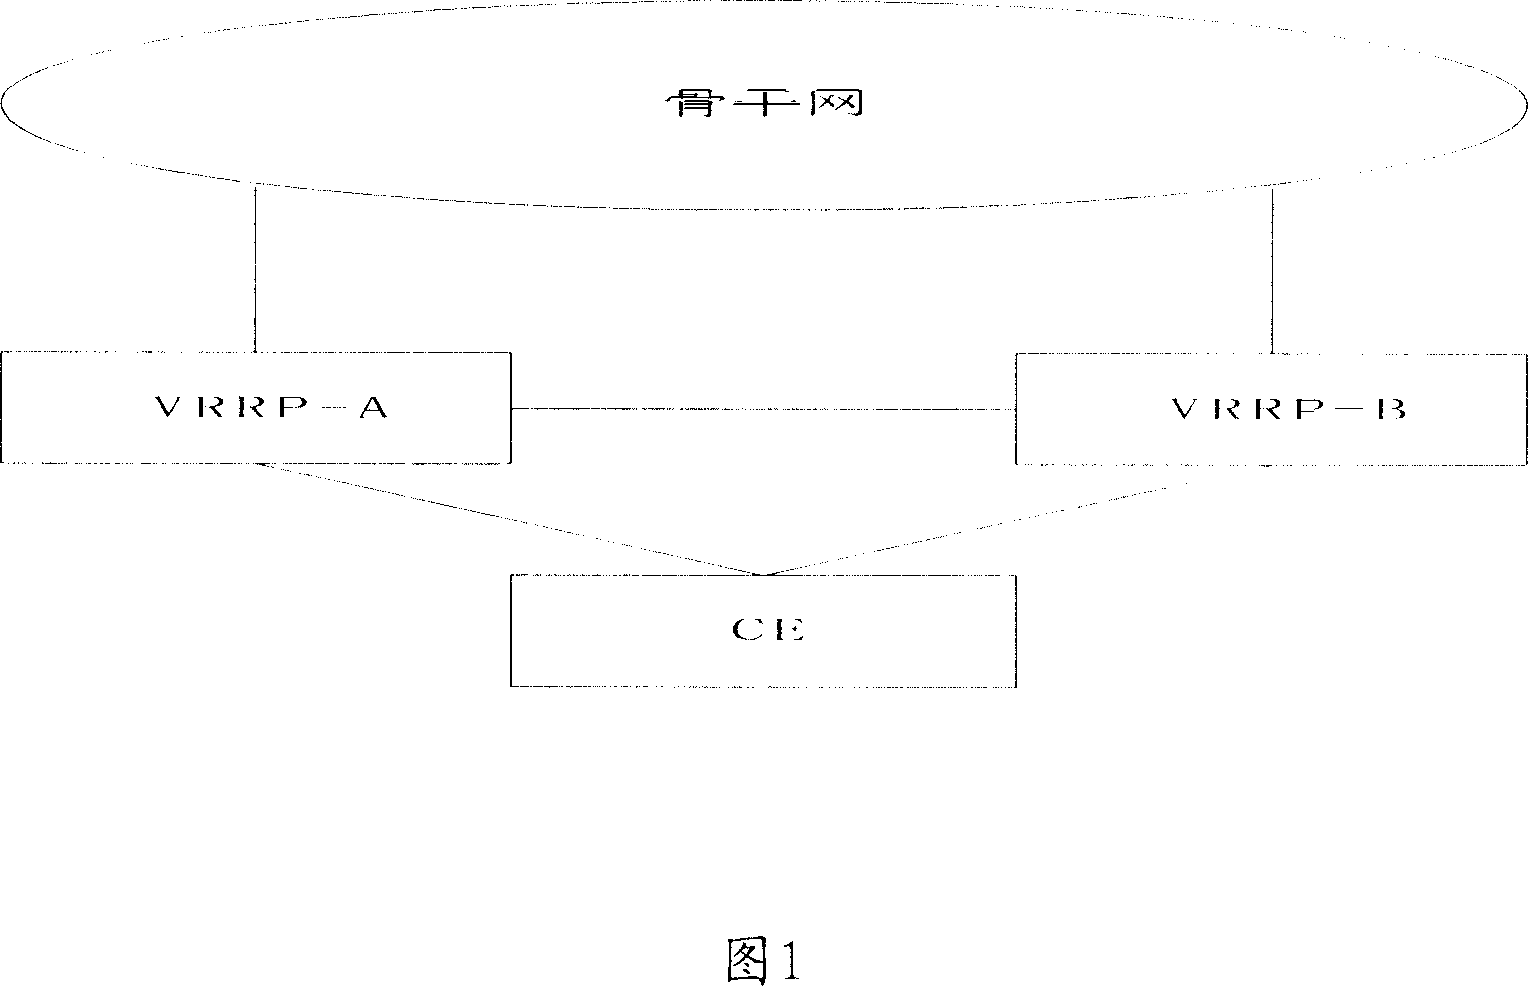 Method for implementing virtual router redundancy protocol switching between primary/standby devices